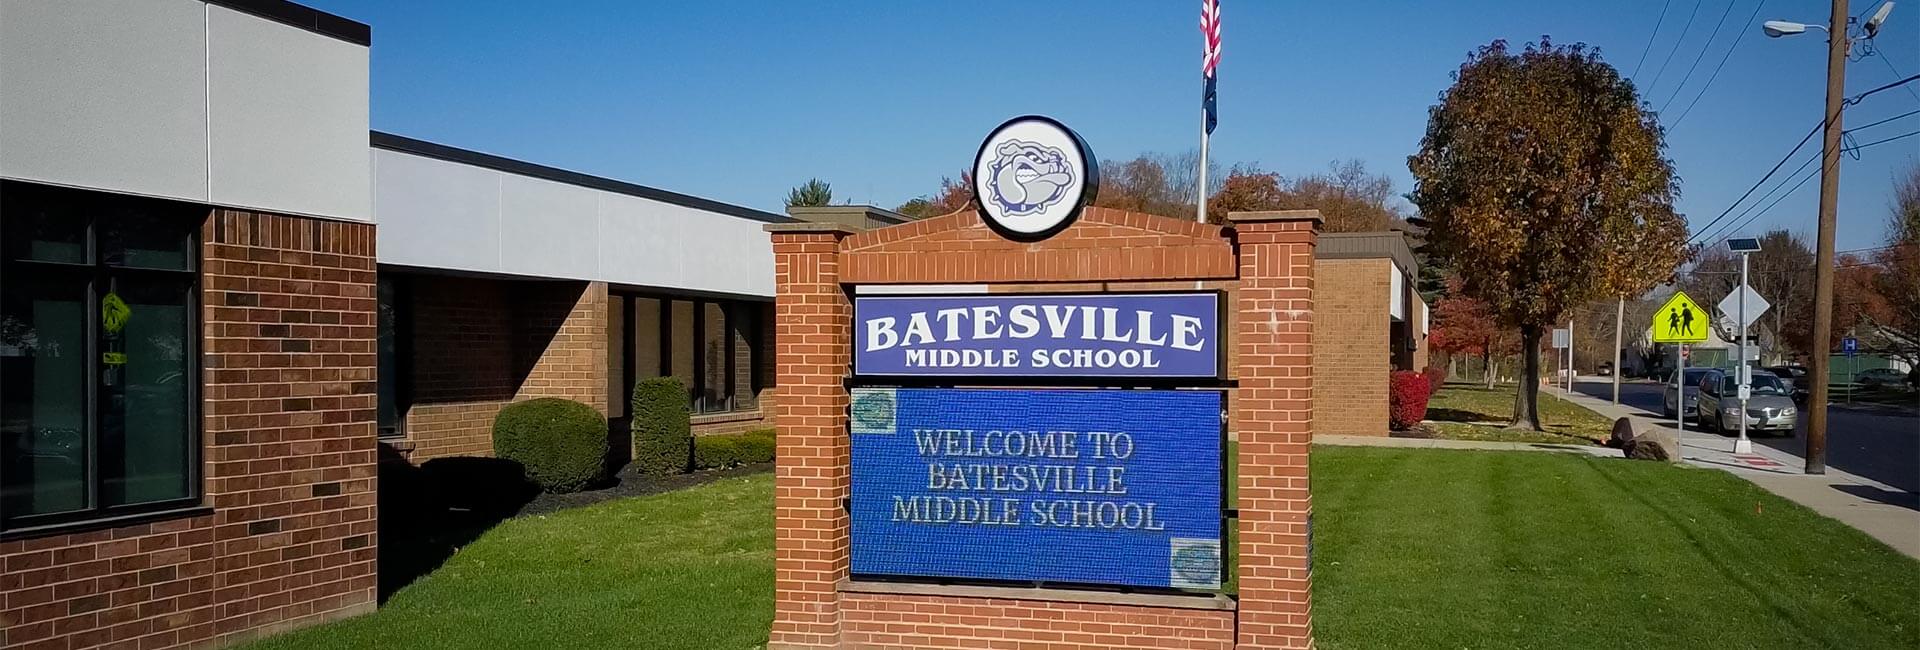 External view of Batesville Middle School